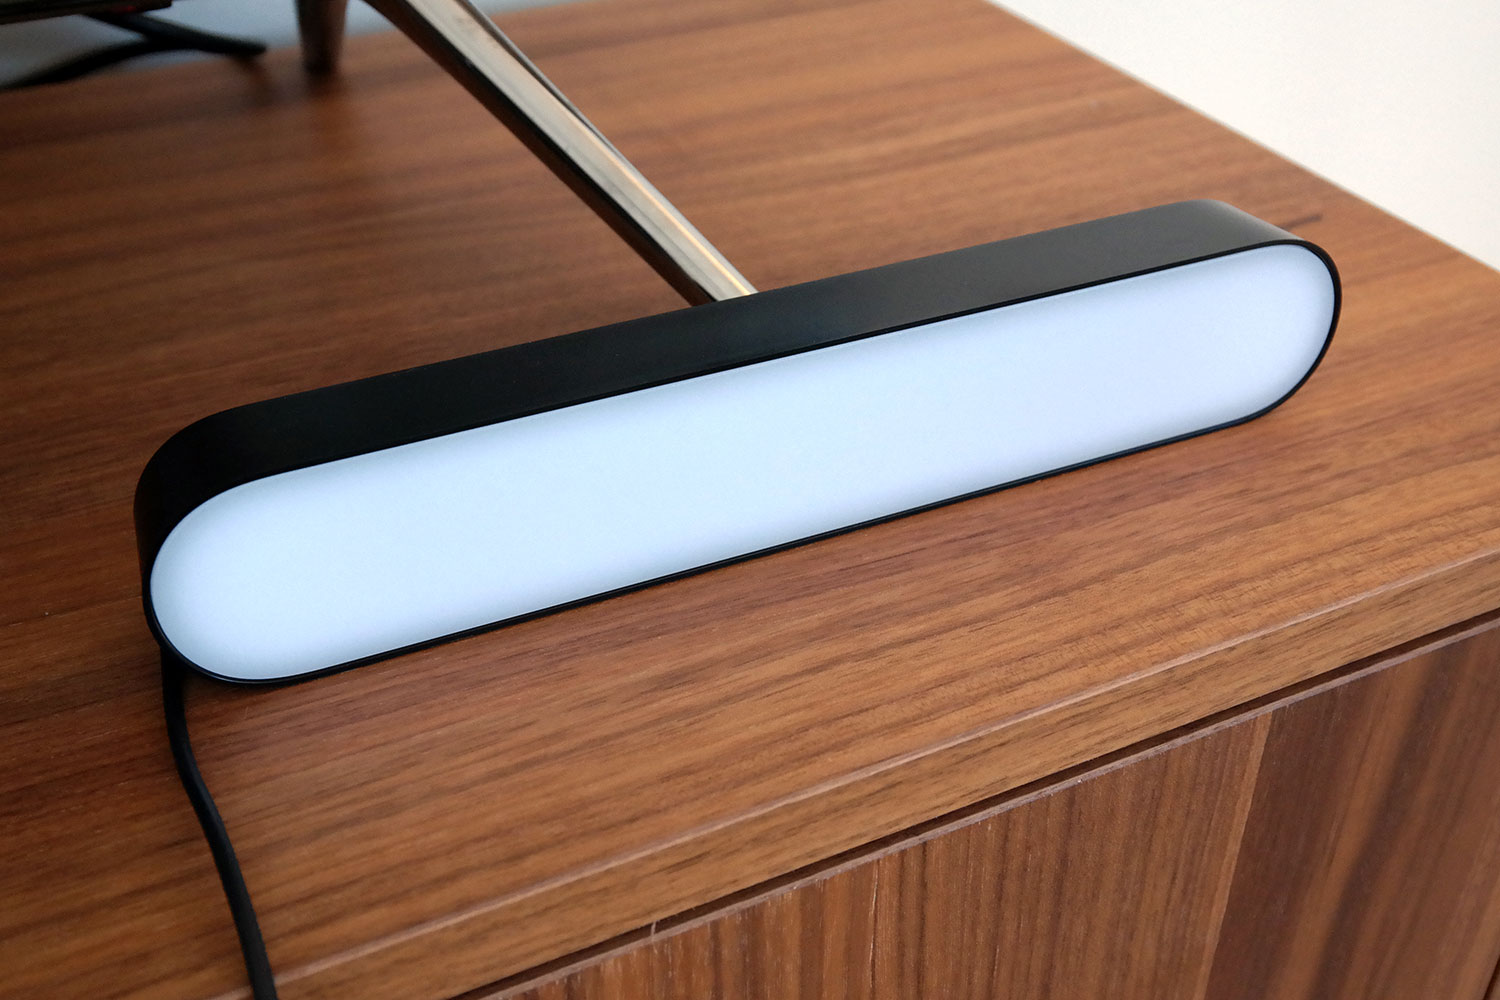 Philips Hue Play Light Bars Unboxing and Review - The DIY Life